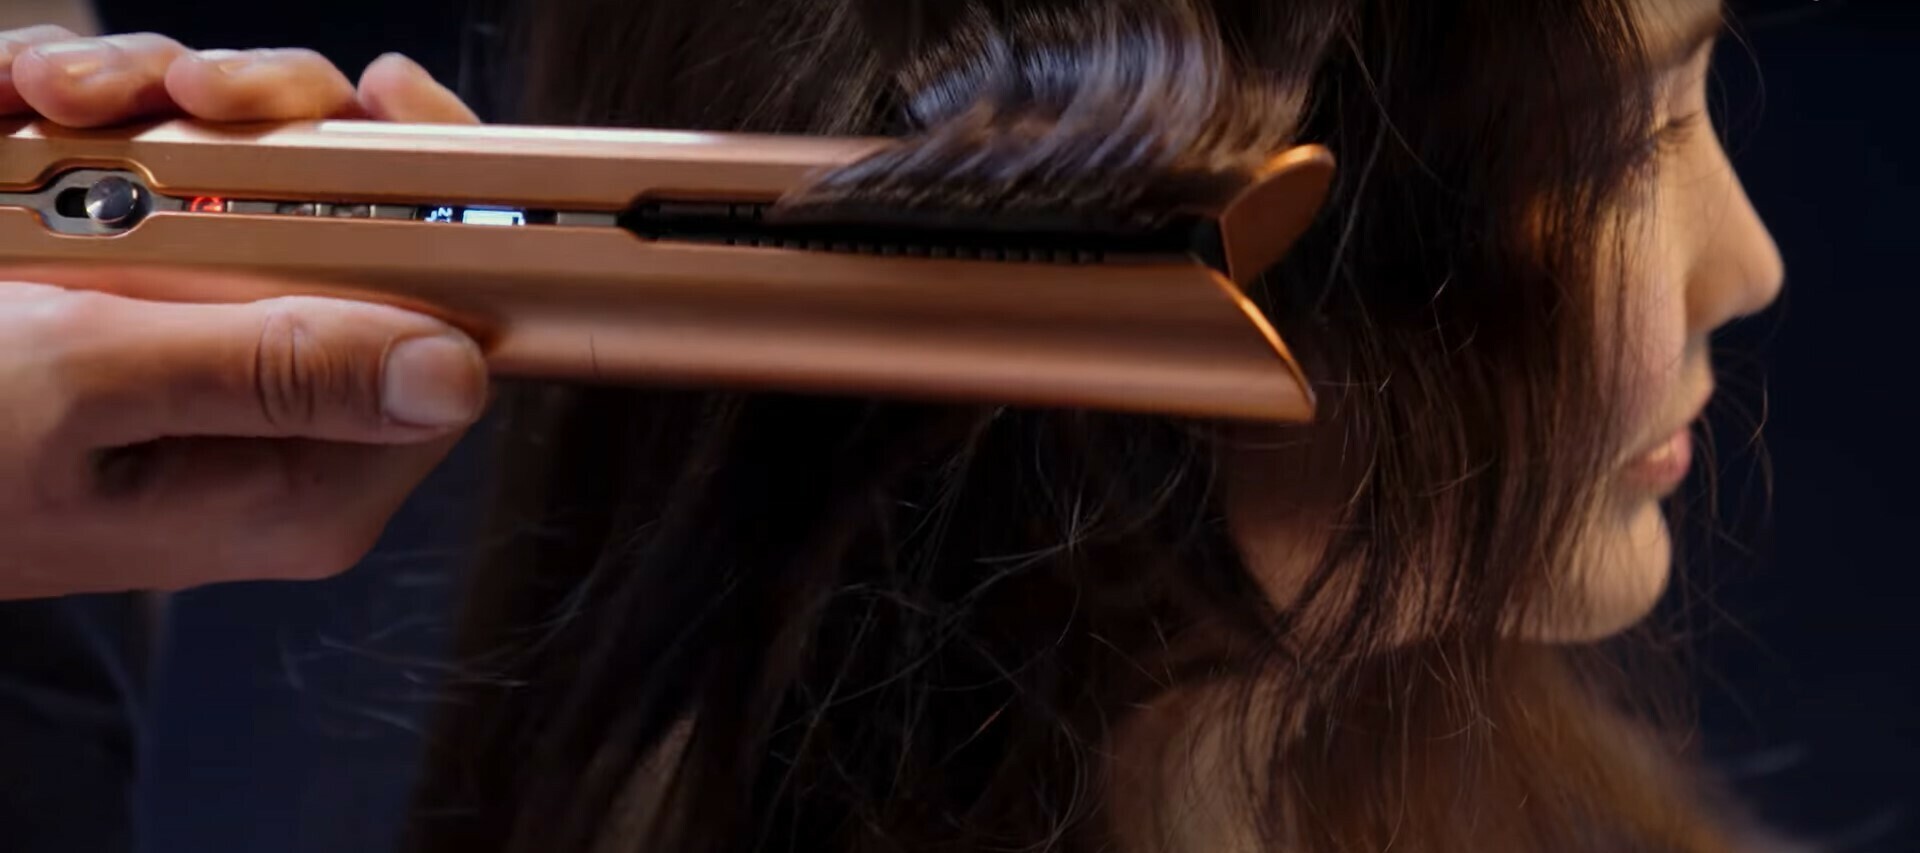 How to create S-waves with the Dyson Corrale™ hair straightener